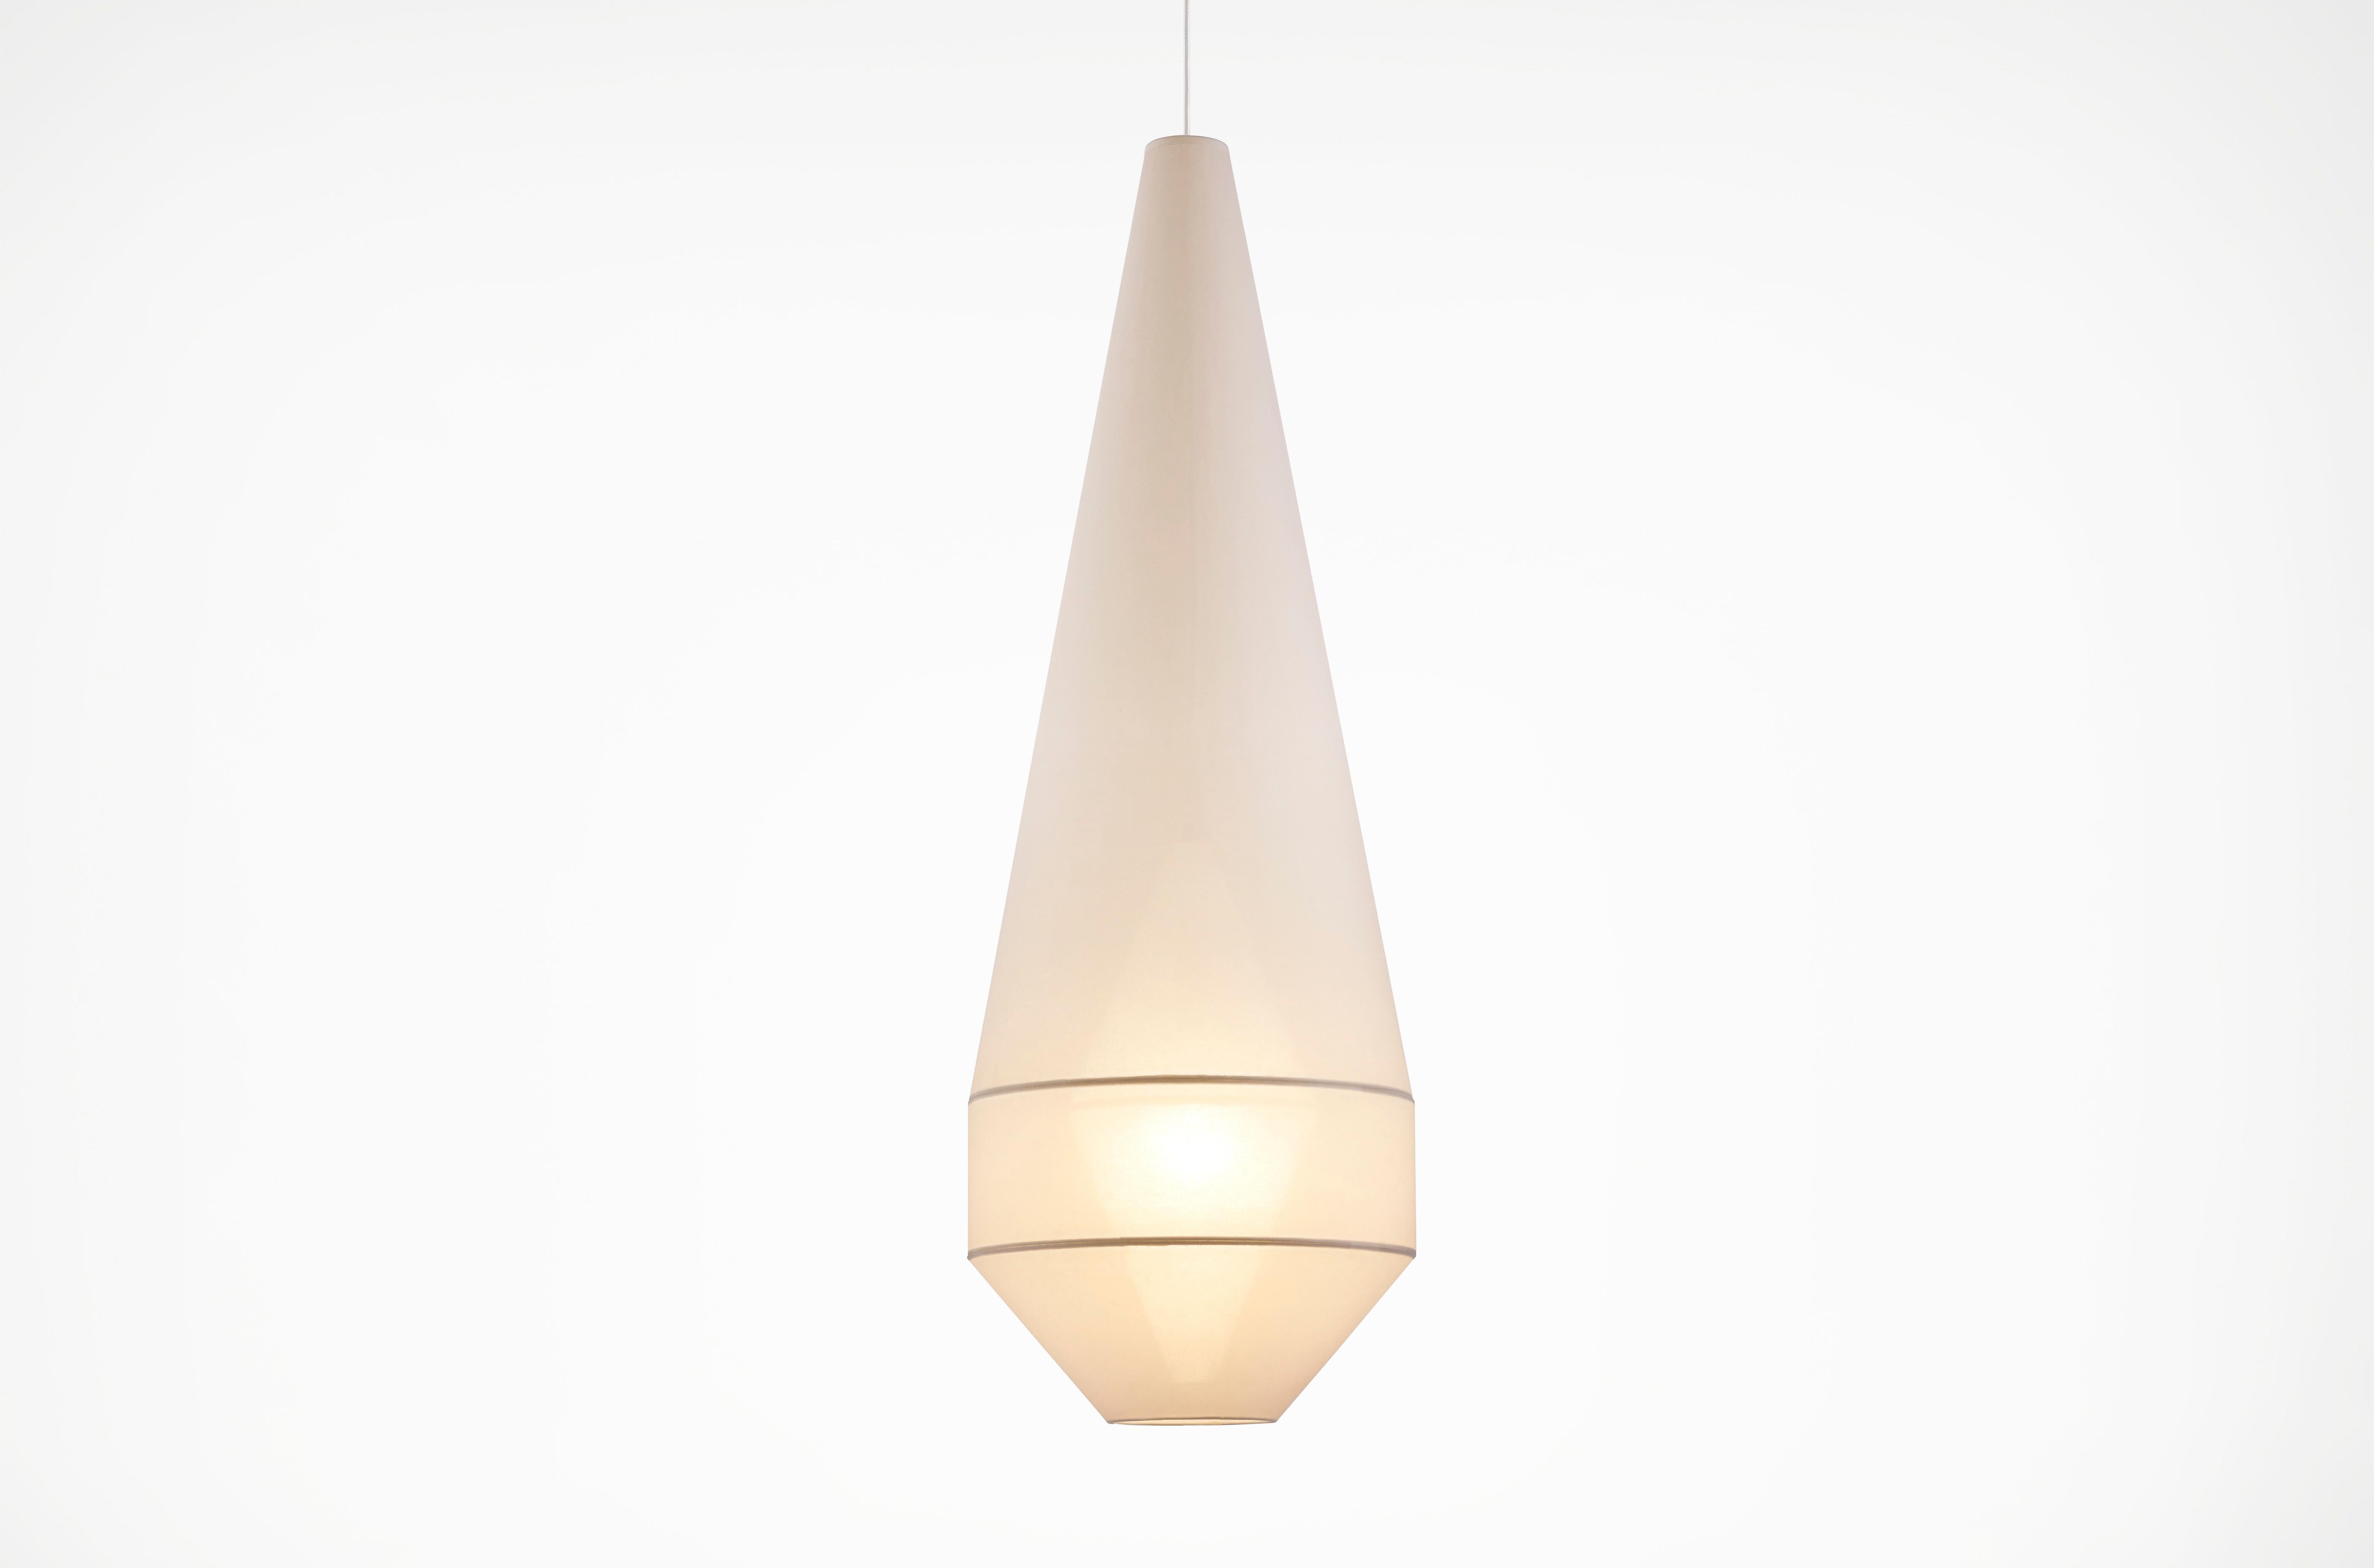 Mayu 03 Pendant Light by Coco Flip
Dimensions: D 40 x W 40 x H 120 cm
Materials: White mesh fabric on transparent backing. 
Weight: 2 kg

Standard fixtures included
Pendants:
1 x 80mm Ø ceiling canopy (white)
Black also available on request
2 metres